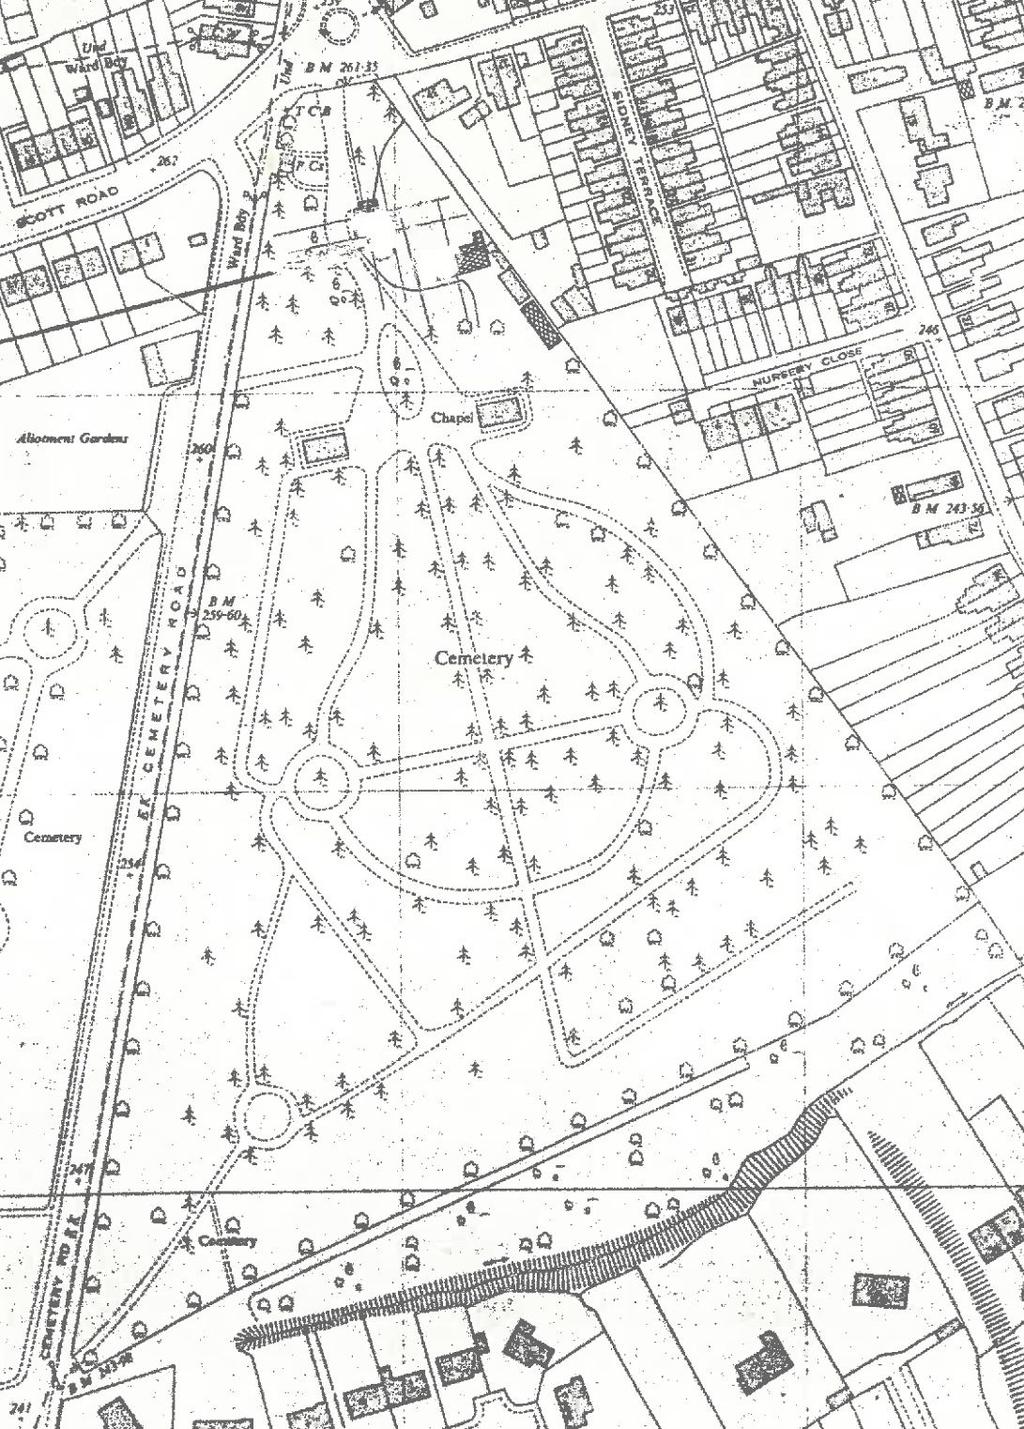 Undated Ordnance Survey map showing the